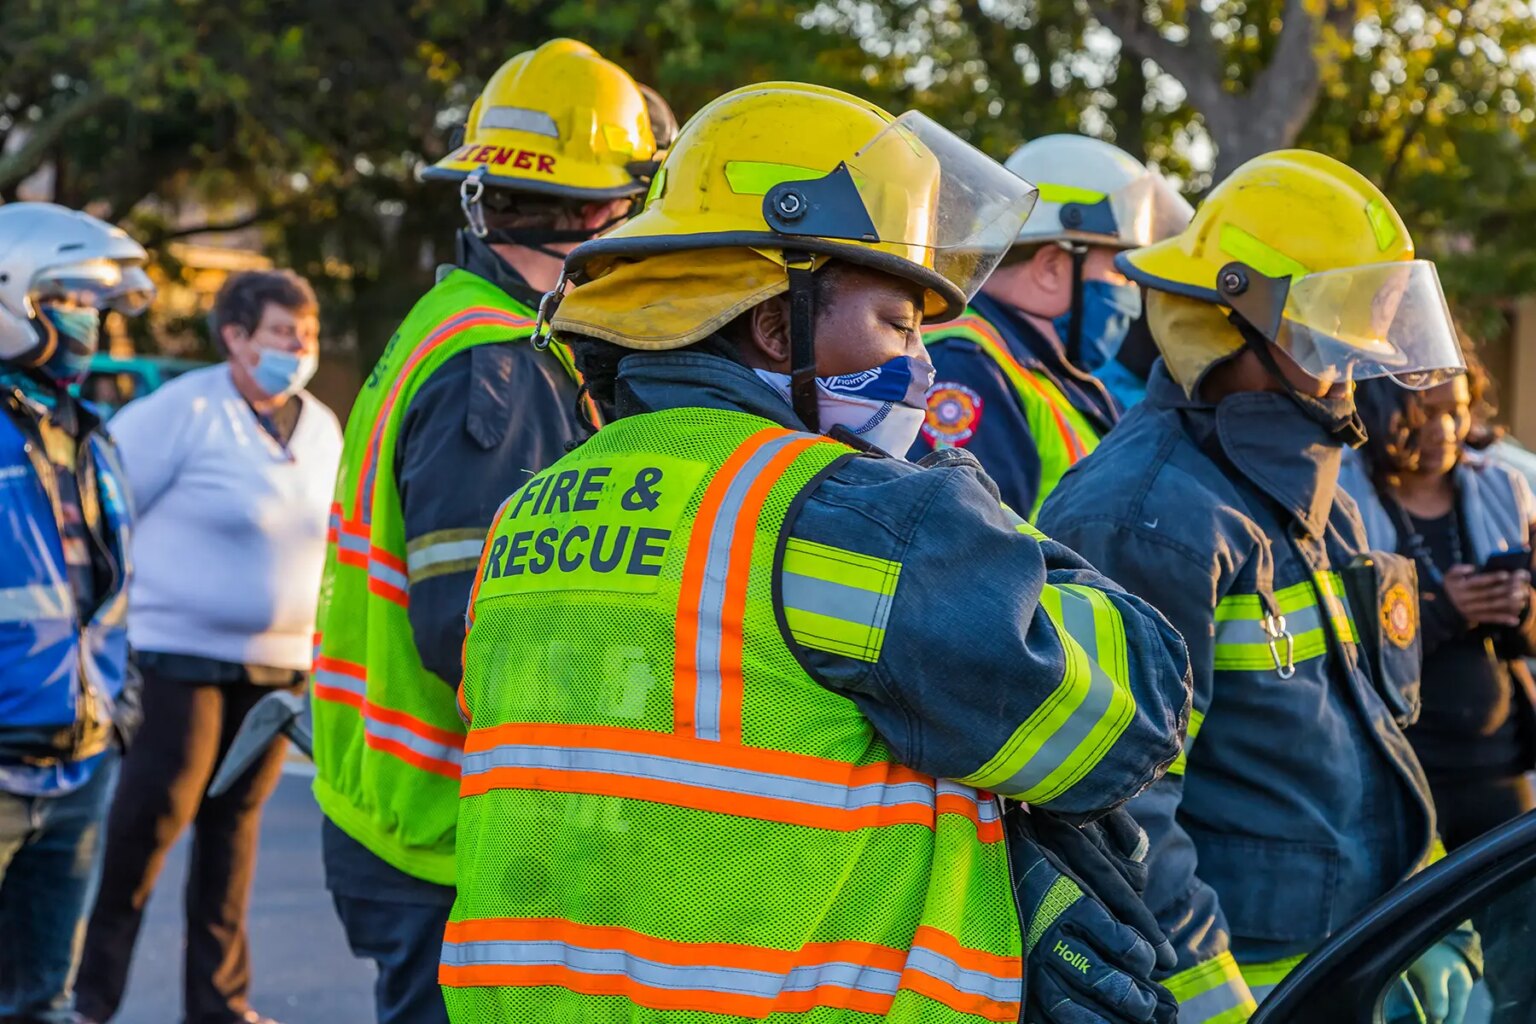 First responders with high visibility vests and helmets at an accident scene responding to an emergency